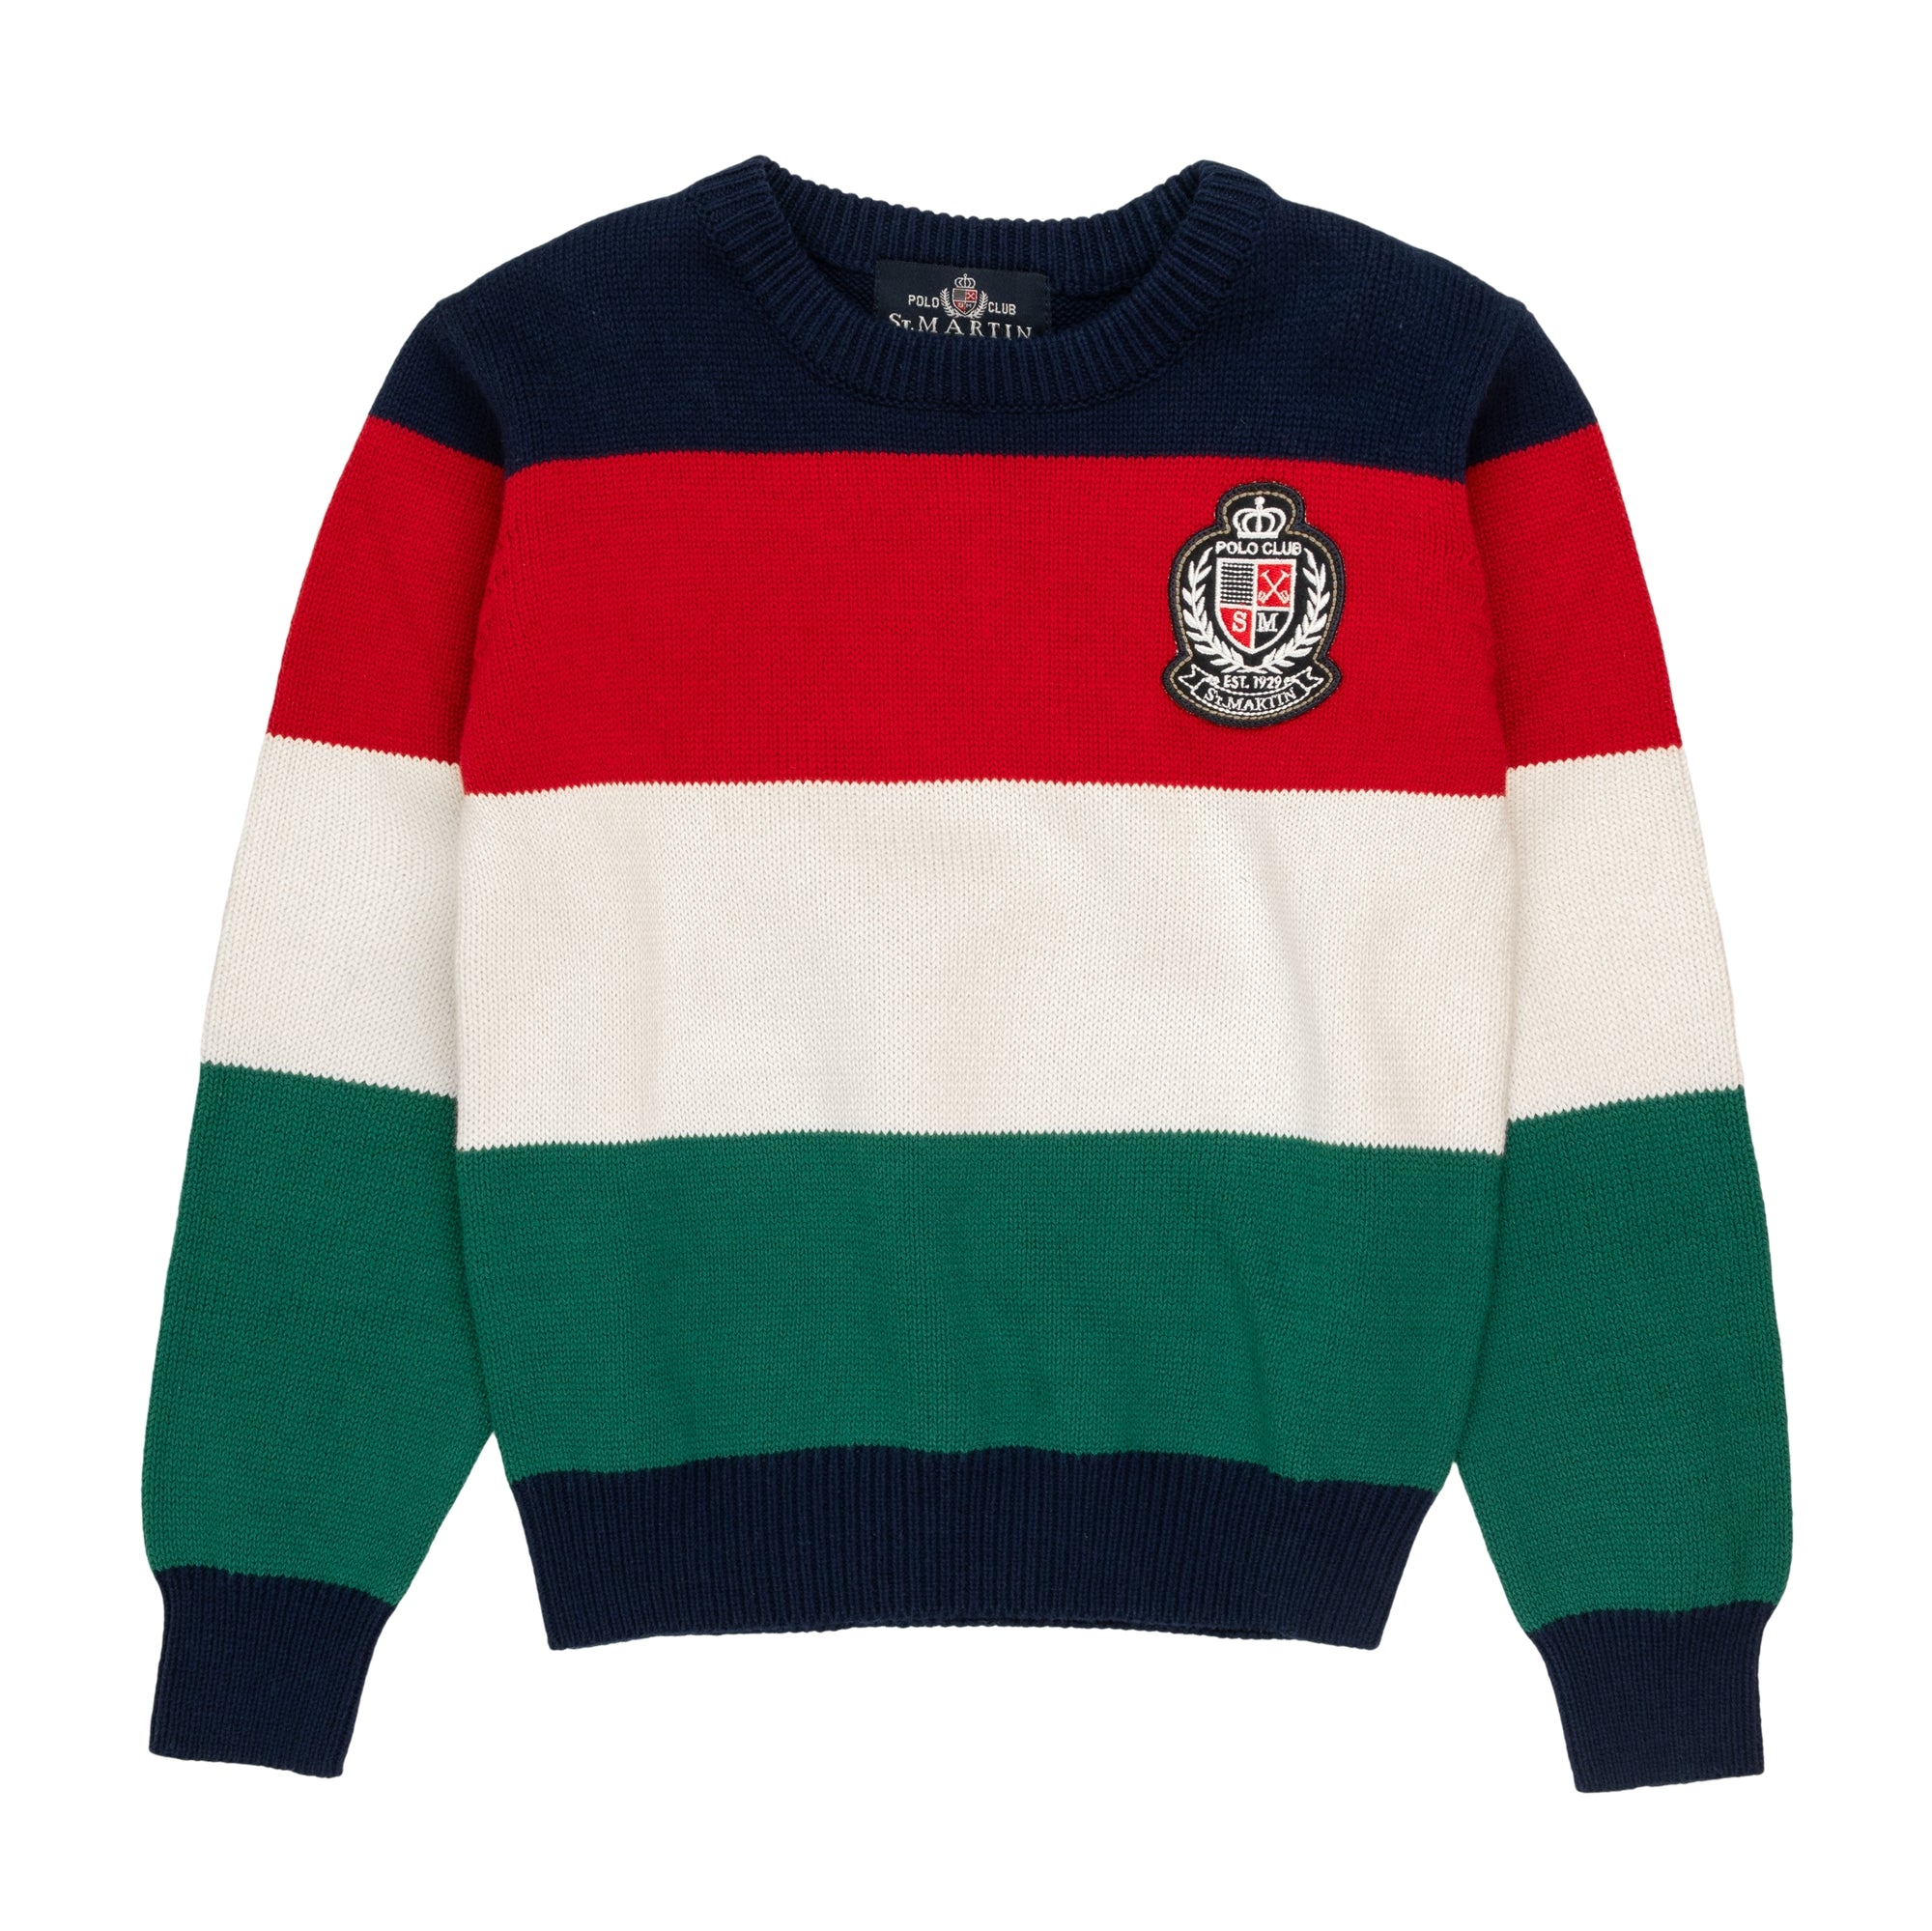 7 gauge crew neck with logo embroidery and wide colored bands